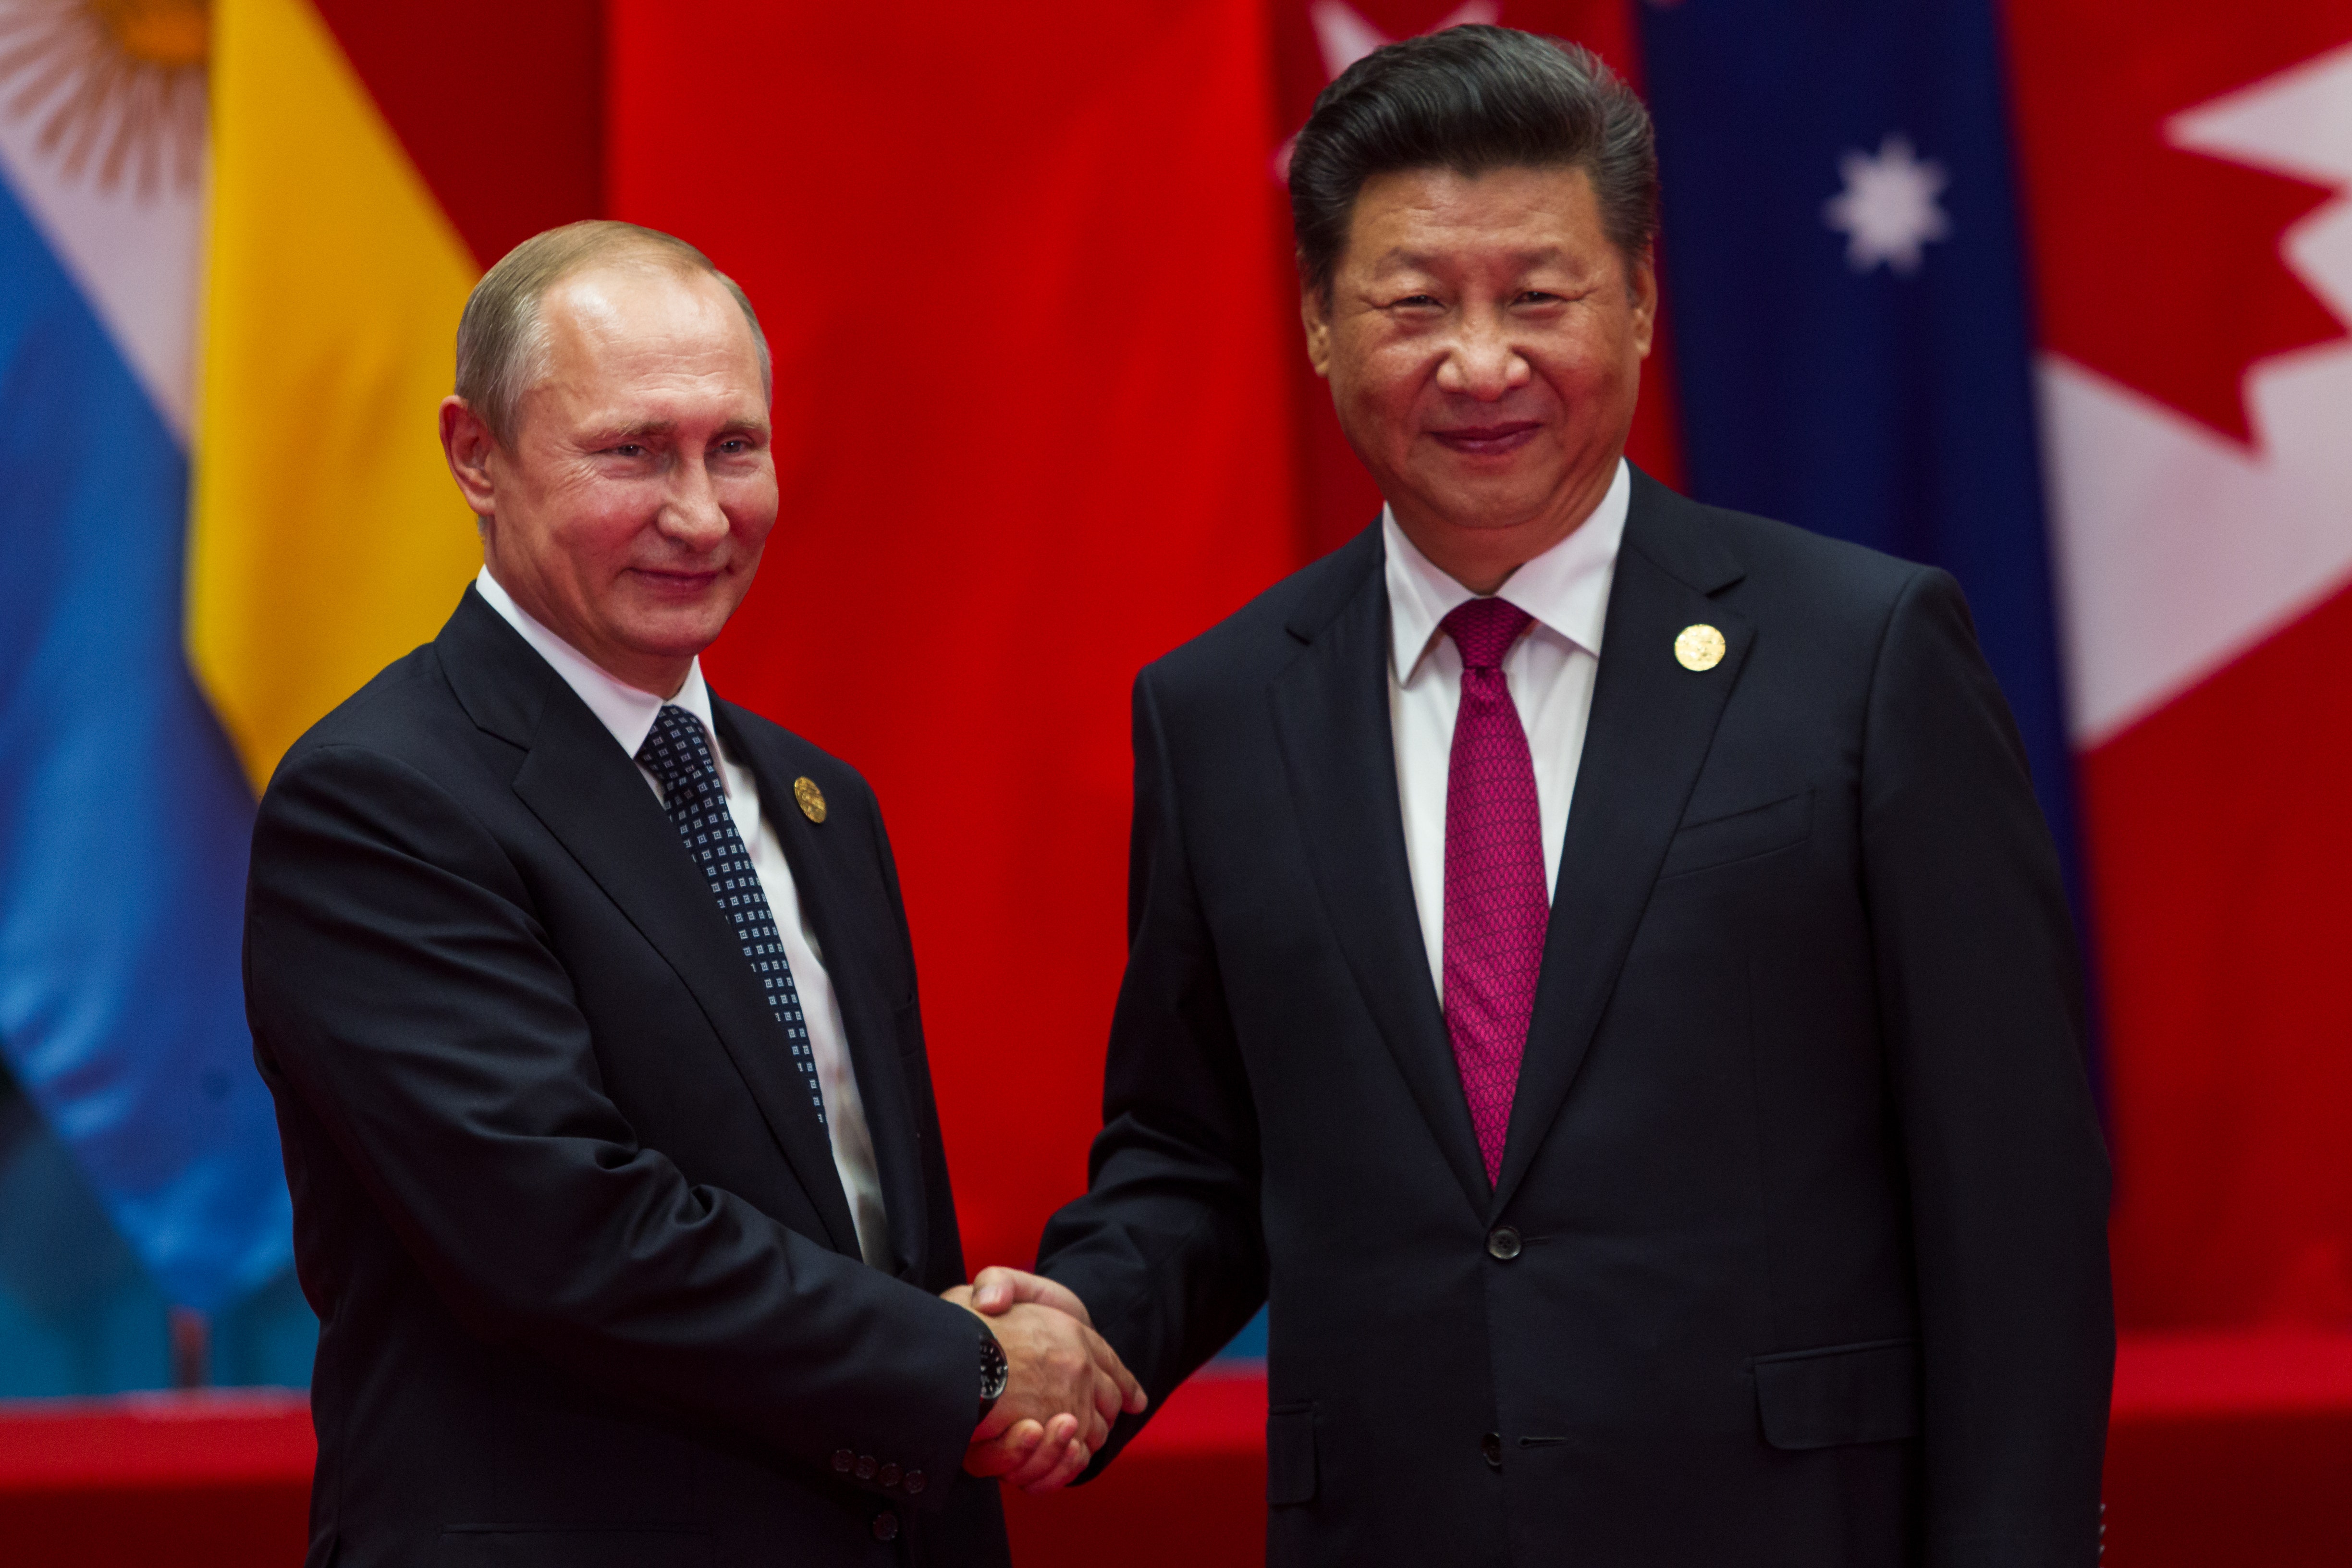 Putin's Mouthpiece Reiterates Xi Jinping's Warning On Taiwan, Says US 'Playing With Fire'